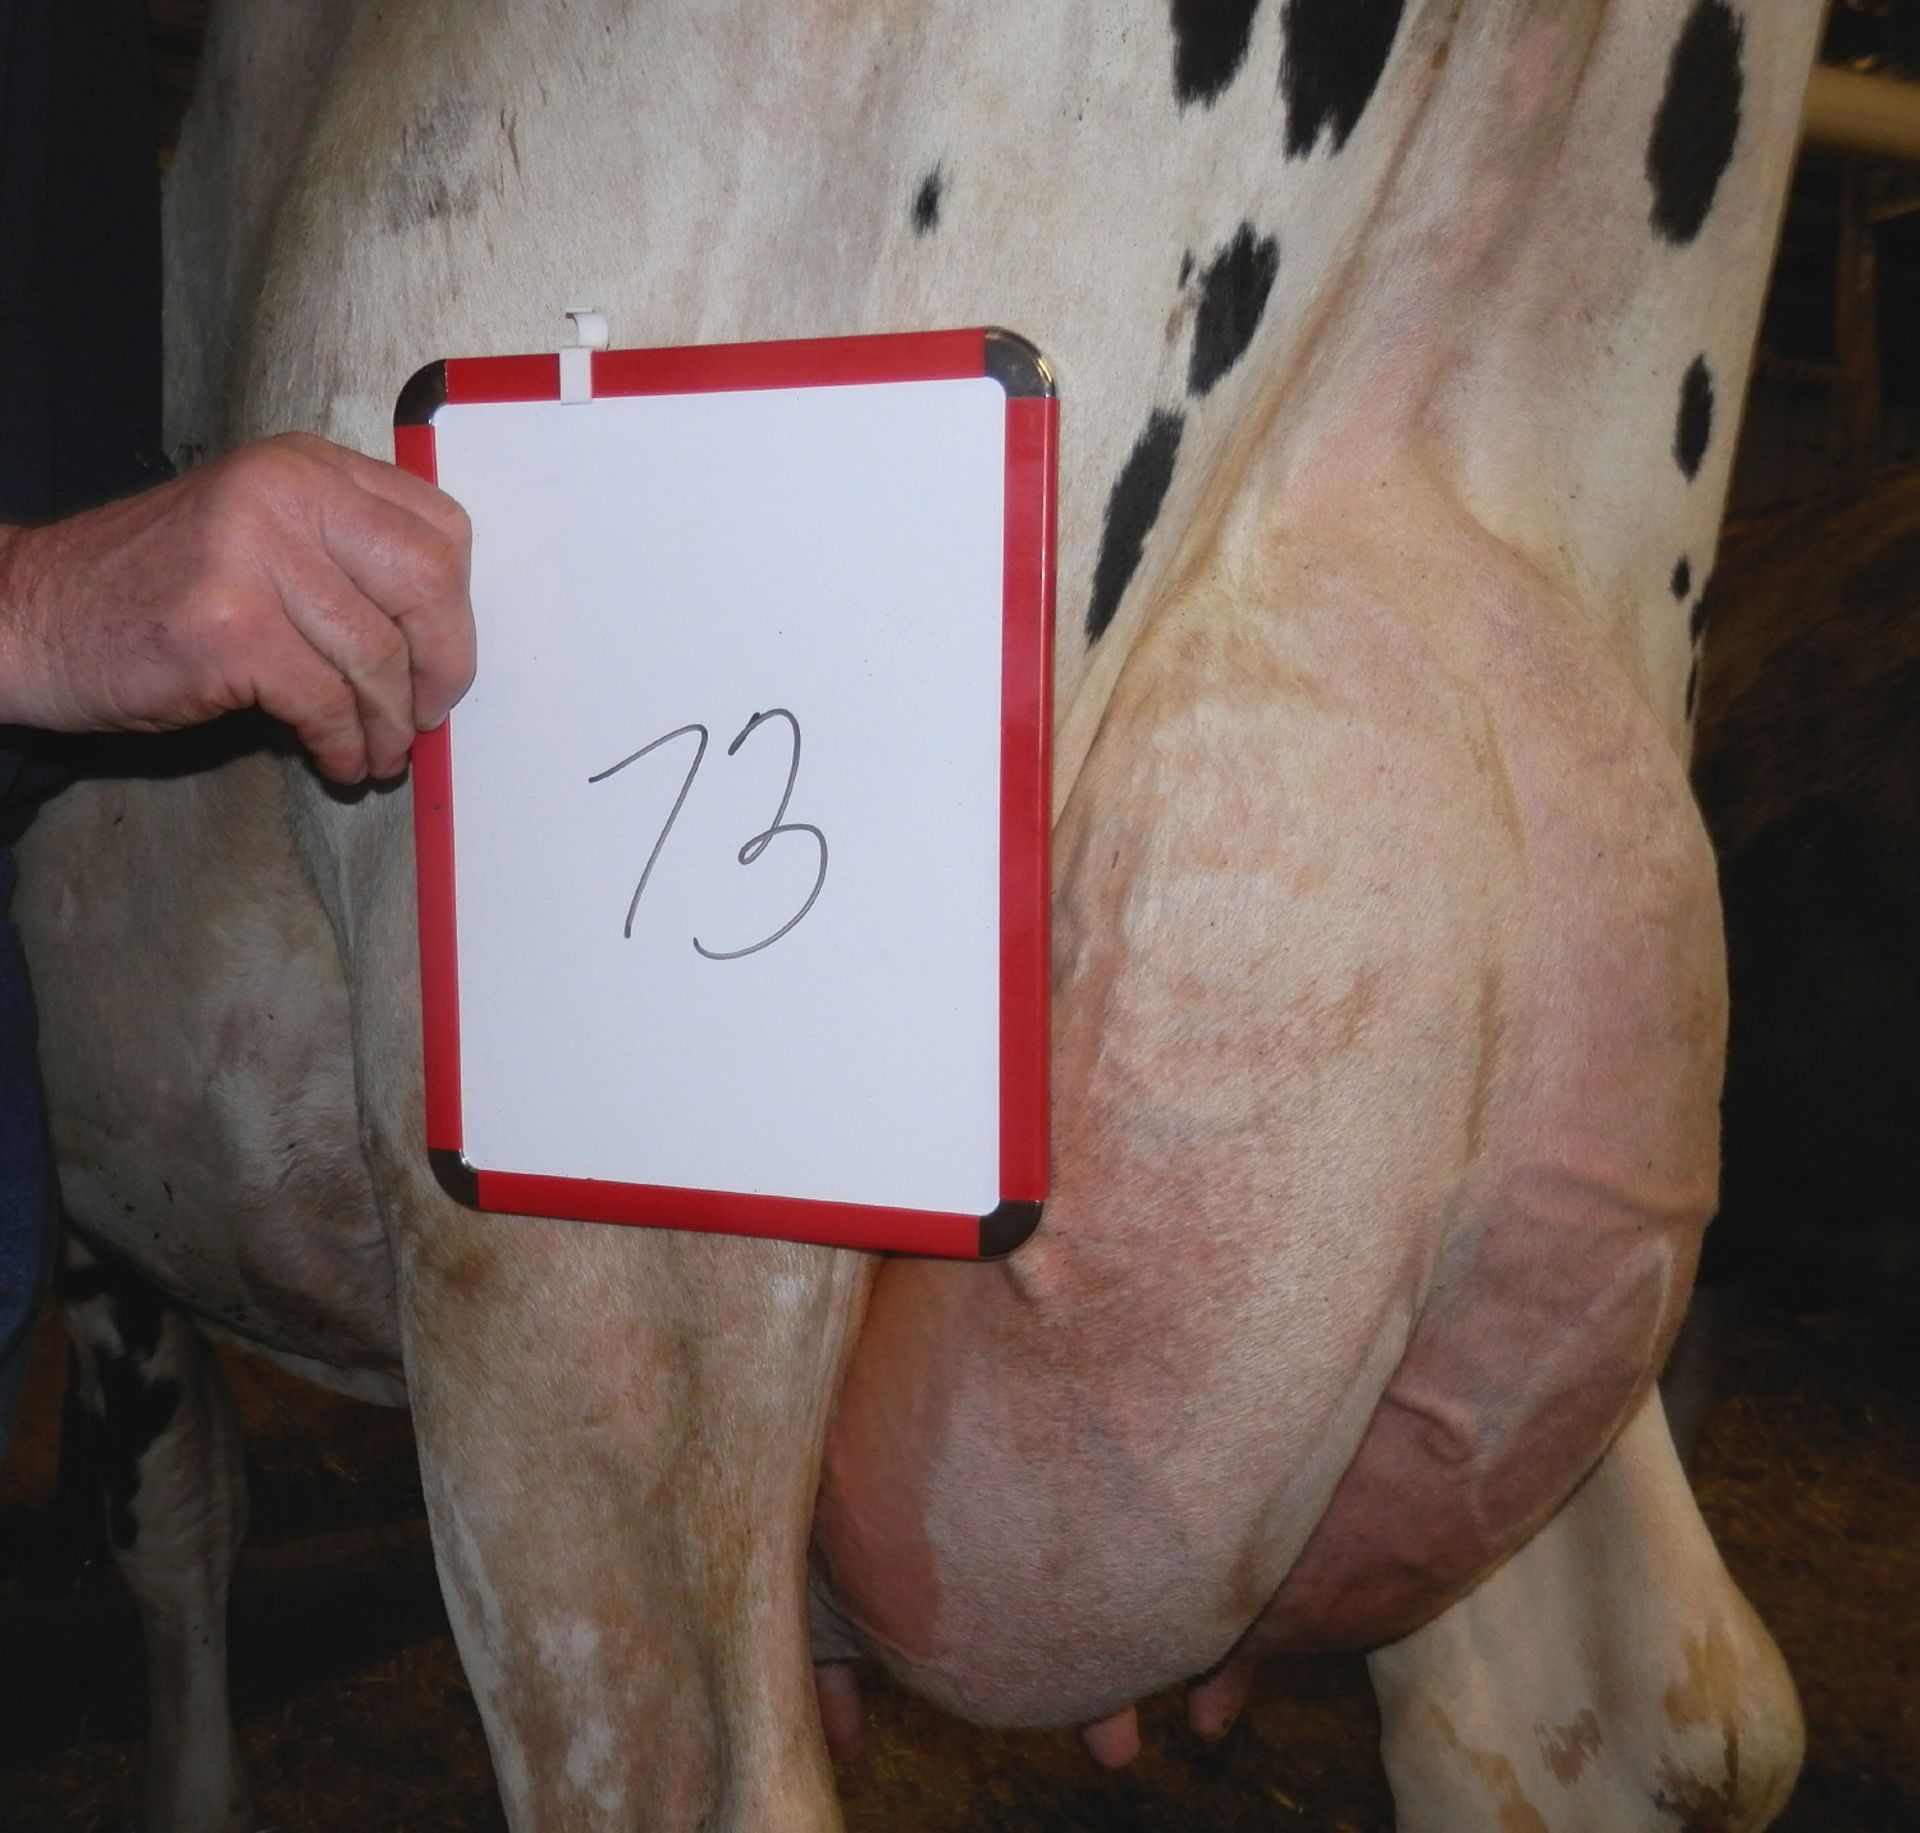 DAIRY COW-LOT 73 PINEAPPLE - Image 2 of 4